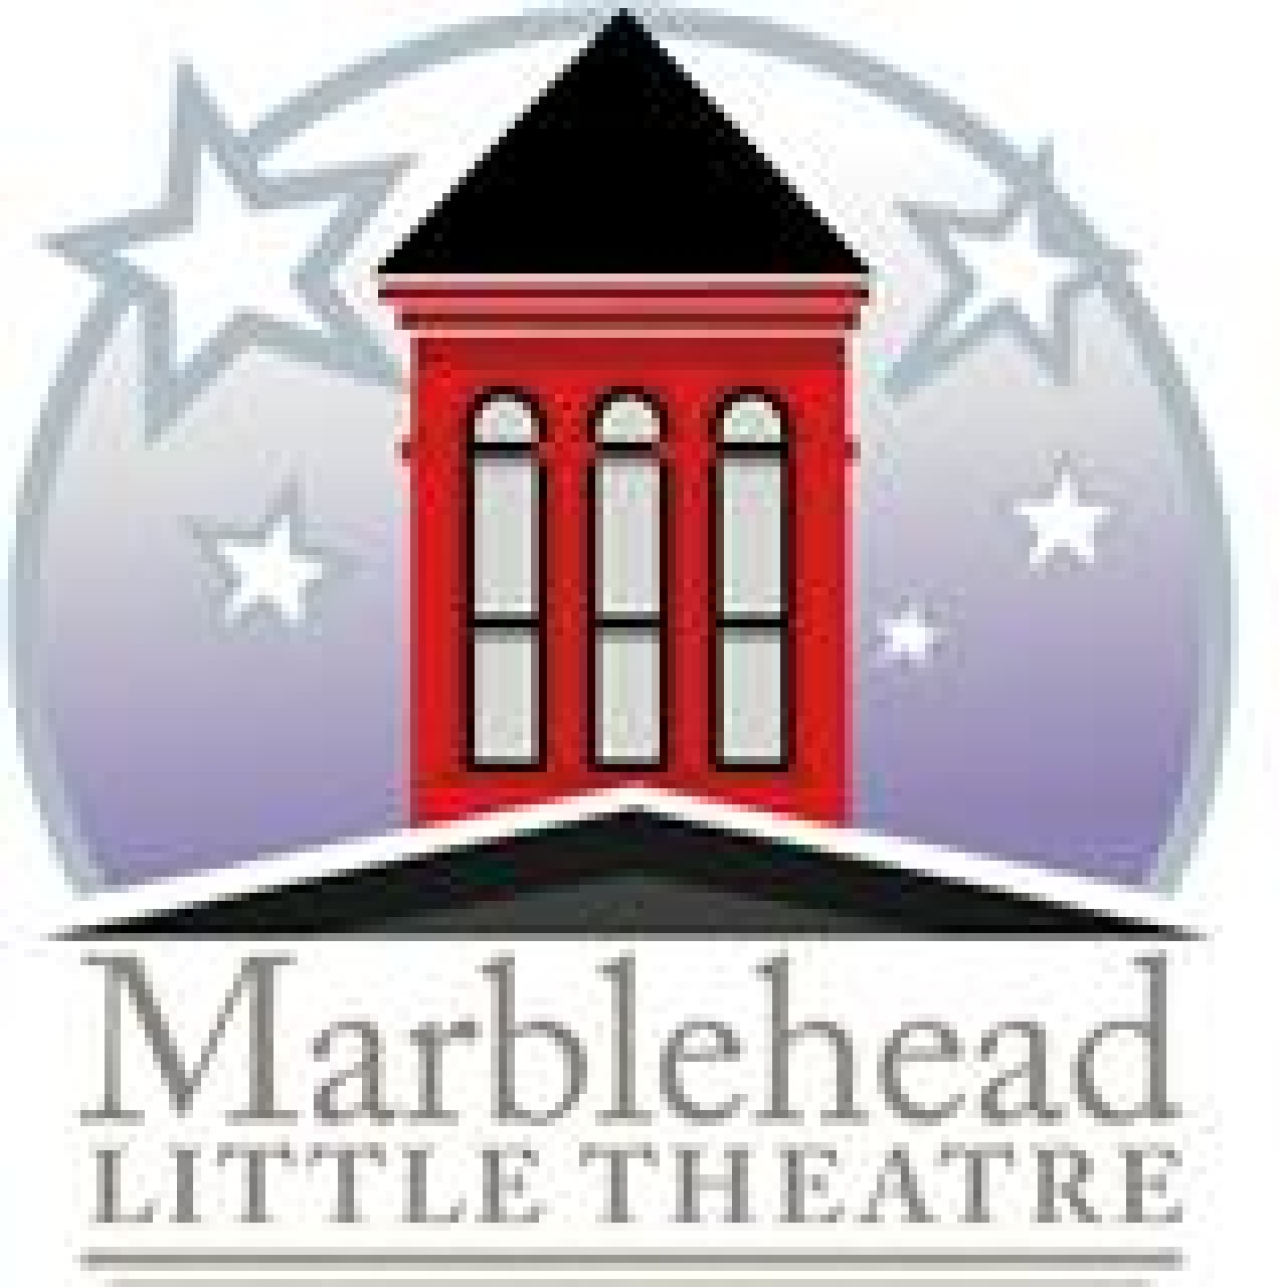 an mlt valentine logo Broadway shows and tickets